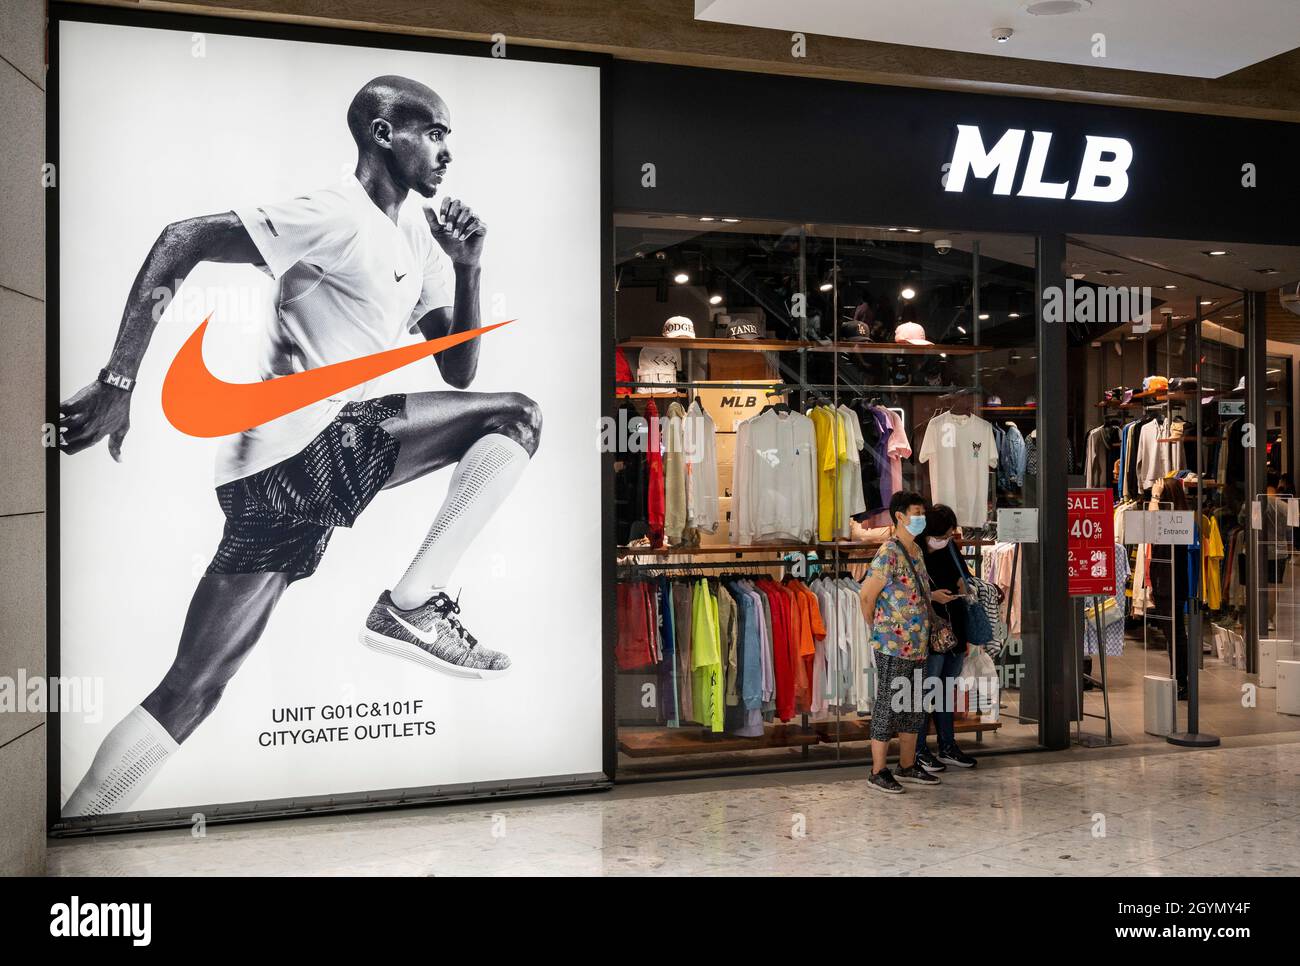 Street applause Cannon American multinational sport clothing brand Nike and professional baseball  organization, Major League Baseball (MLB) stores in Hong Kong Stock Photo -  Alamy